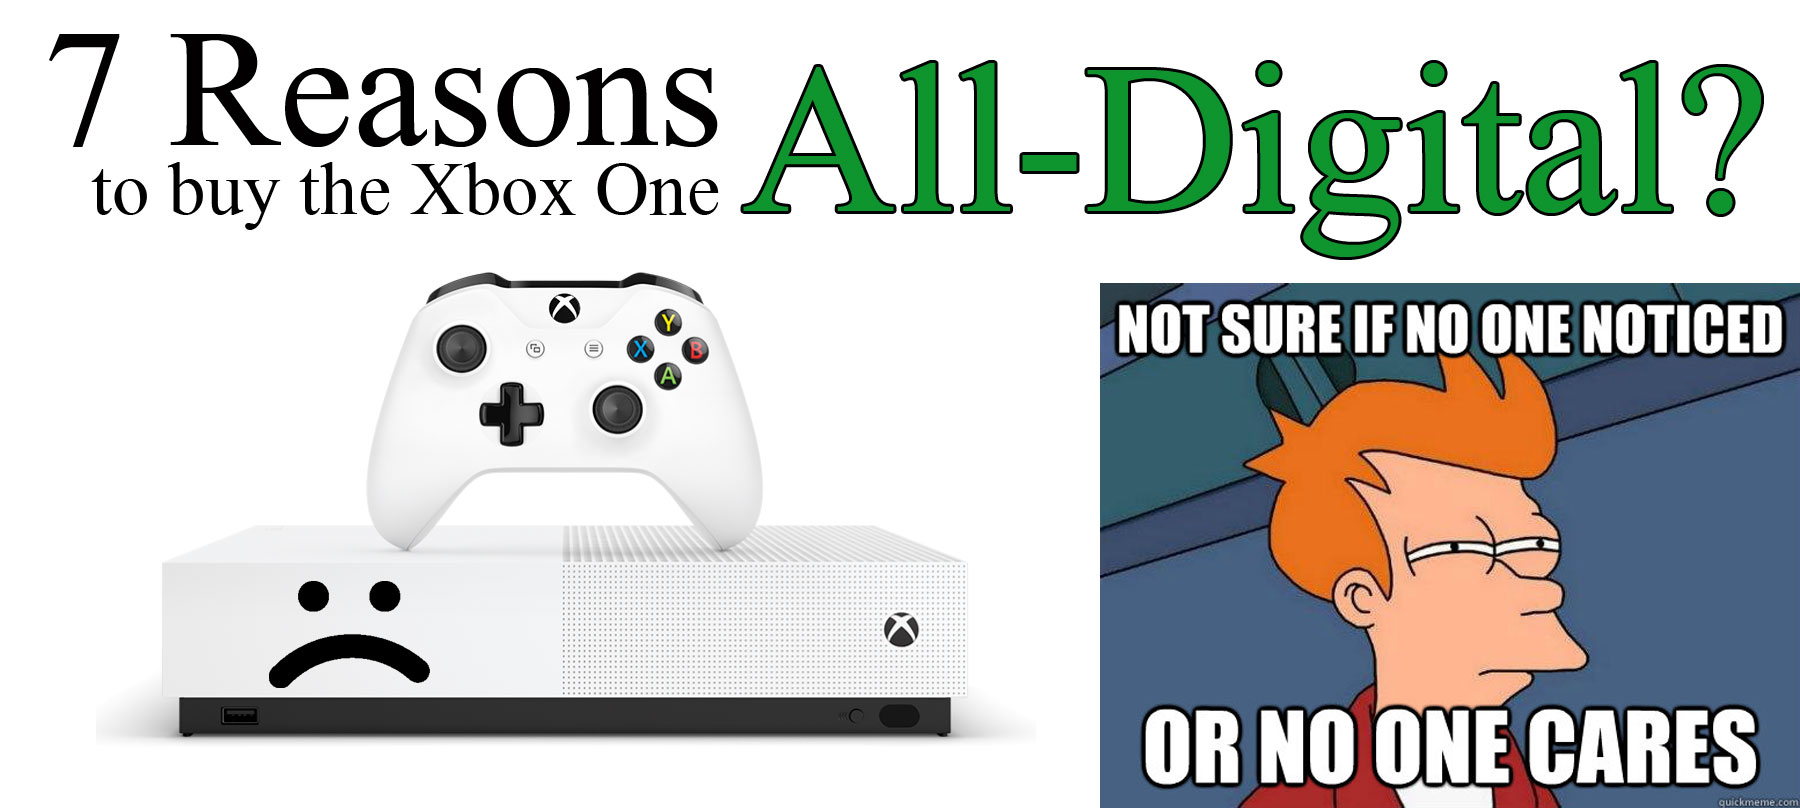 7 Reasons to Buy the Xbox One S All-Digital?